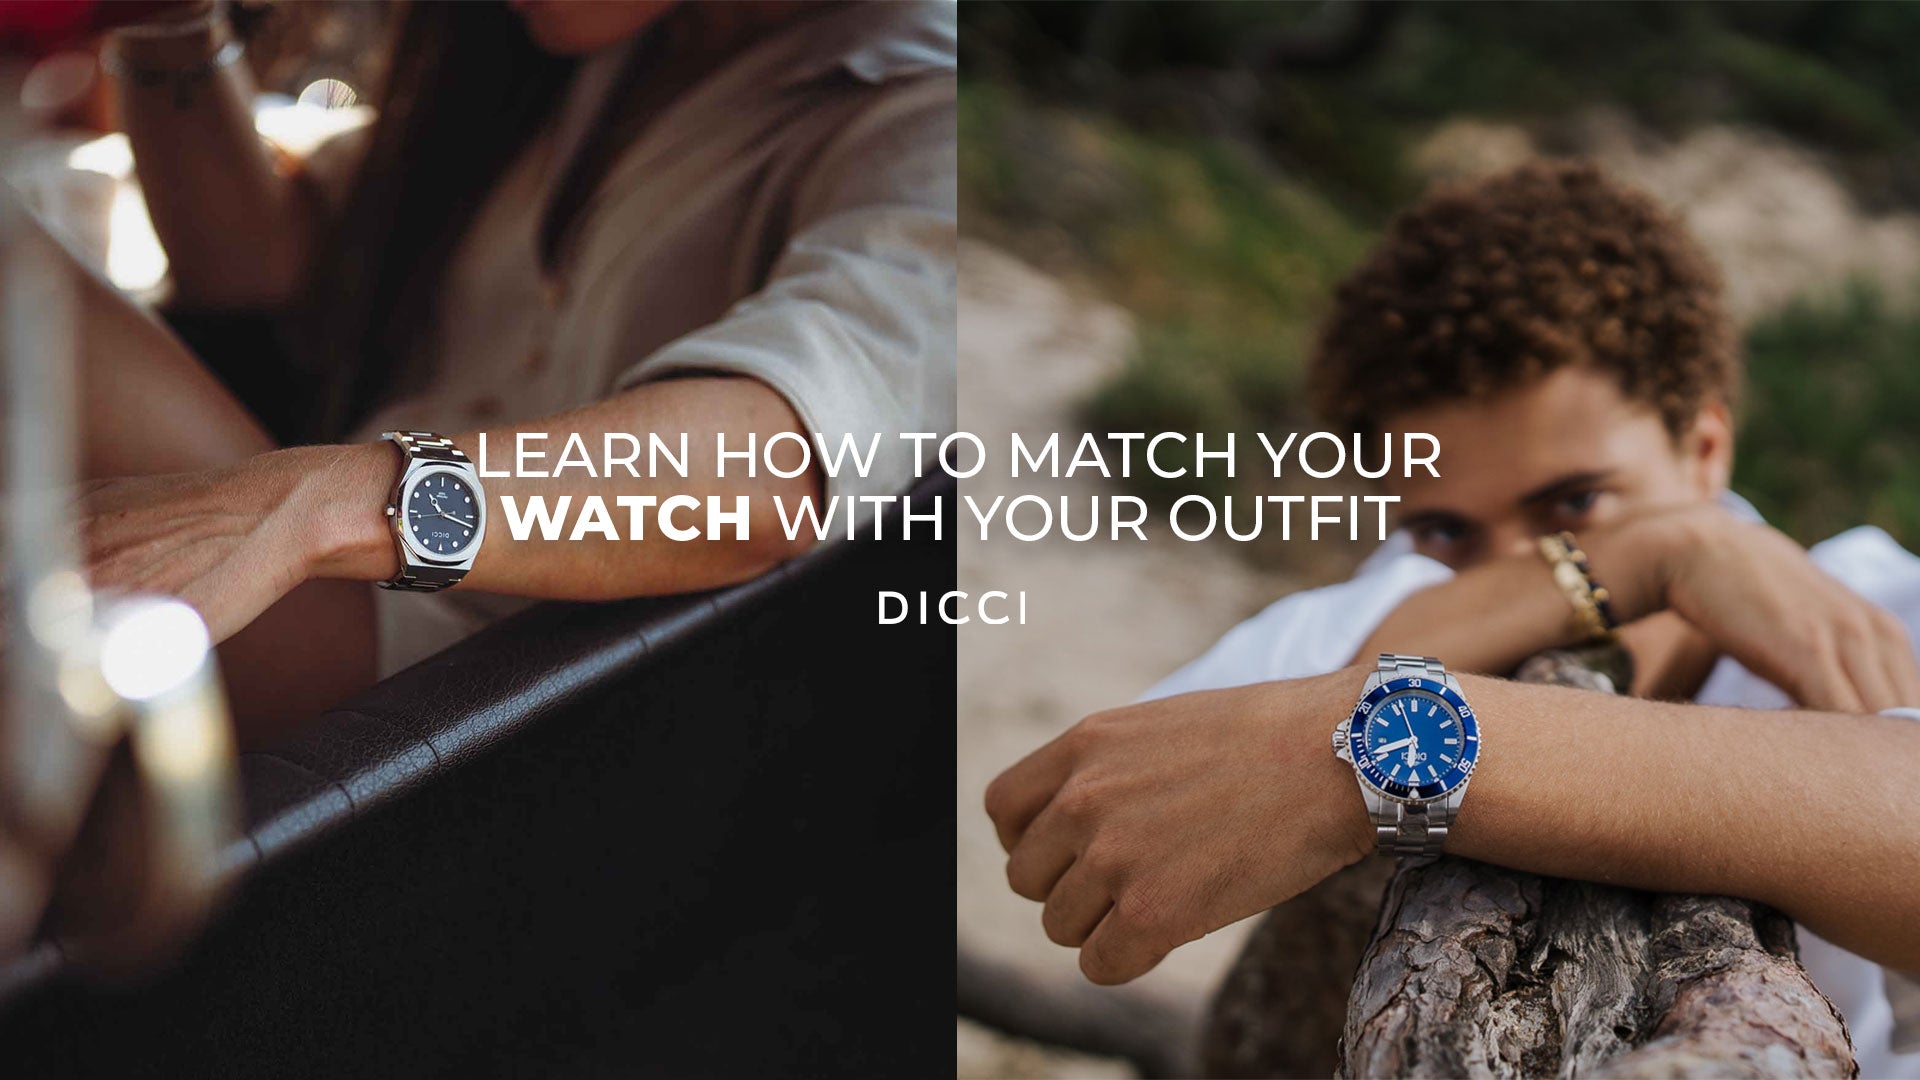 LEARN HOW TO MATCH YOUR WATCH WITH YOUR OUTFIT